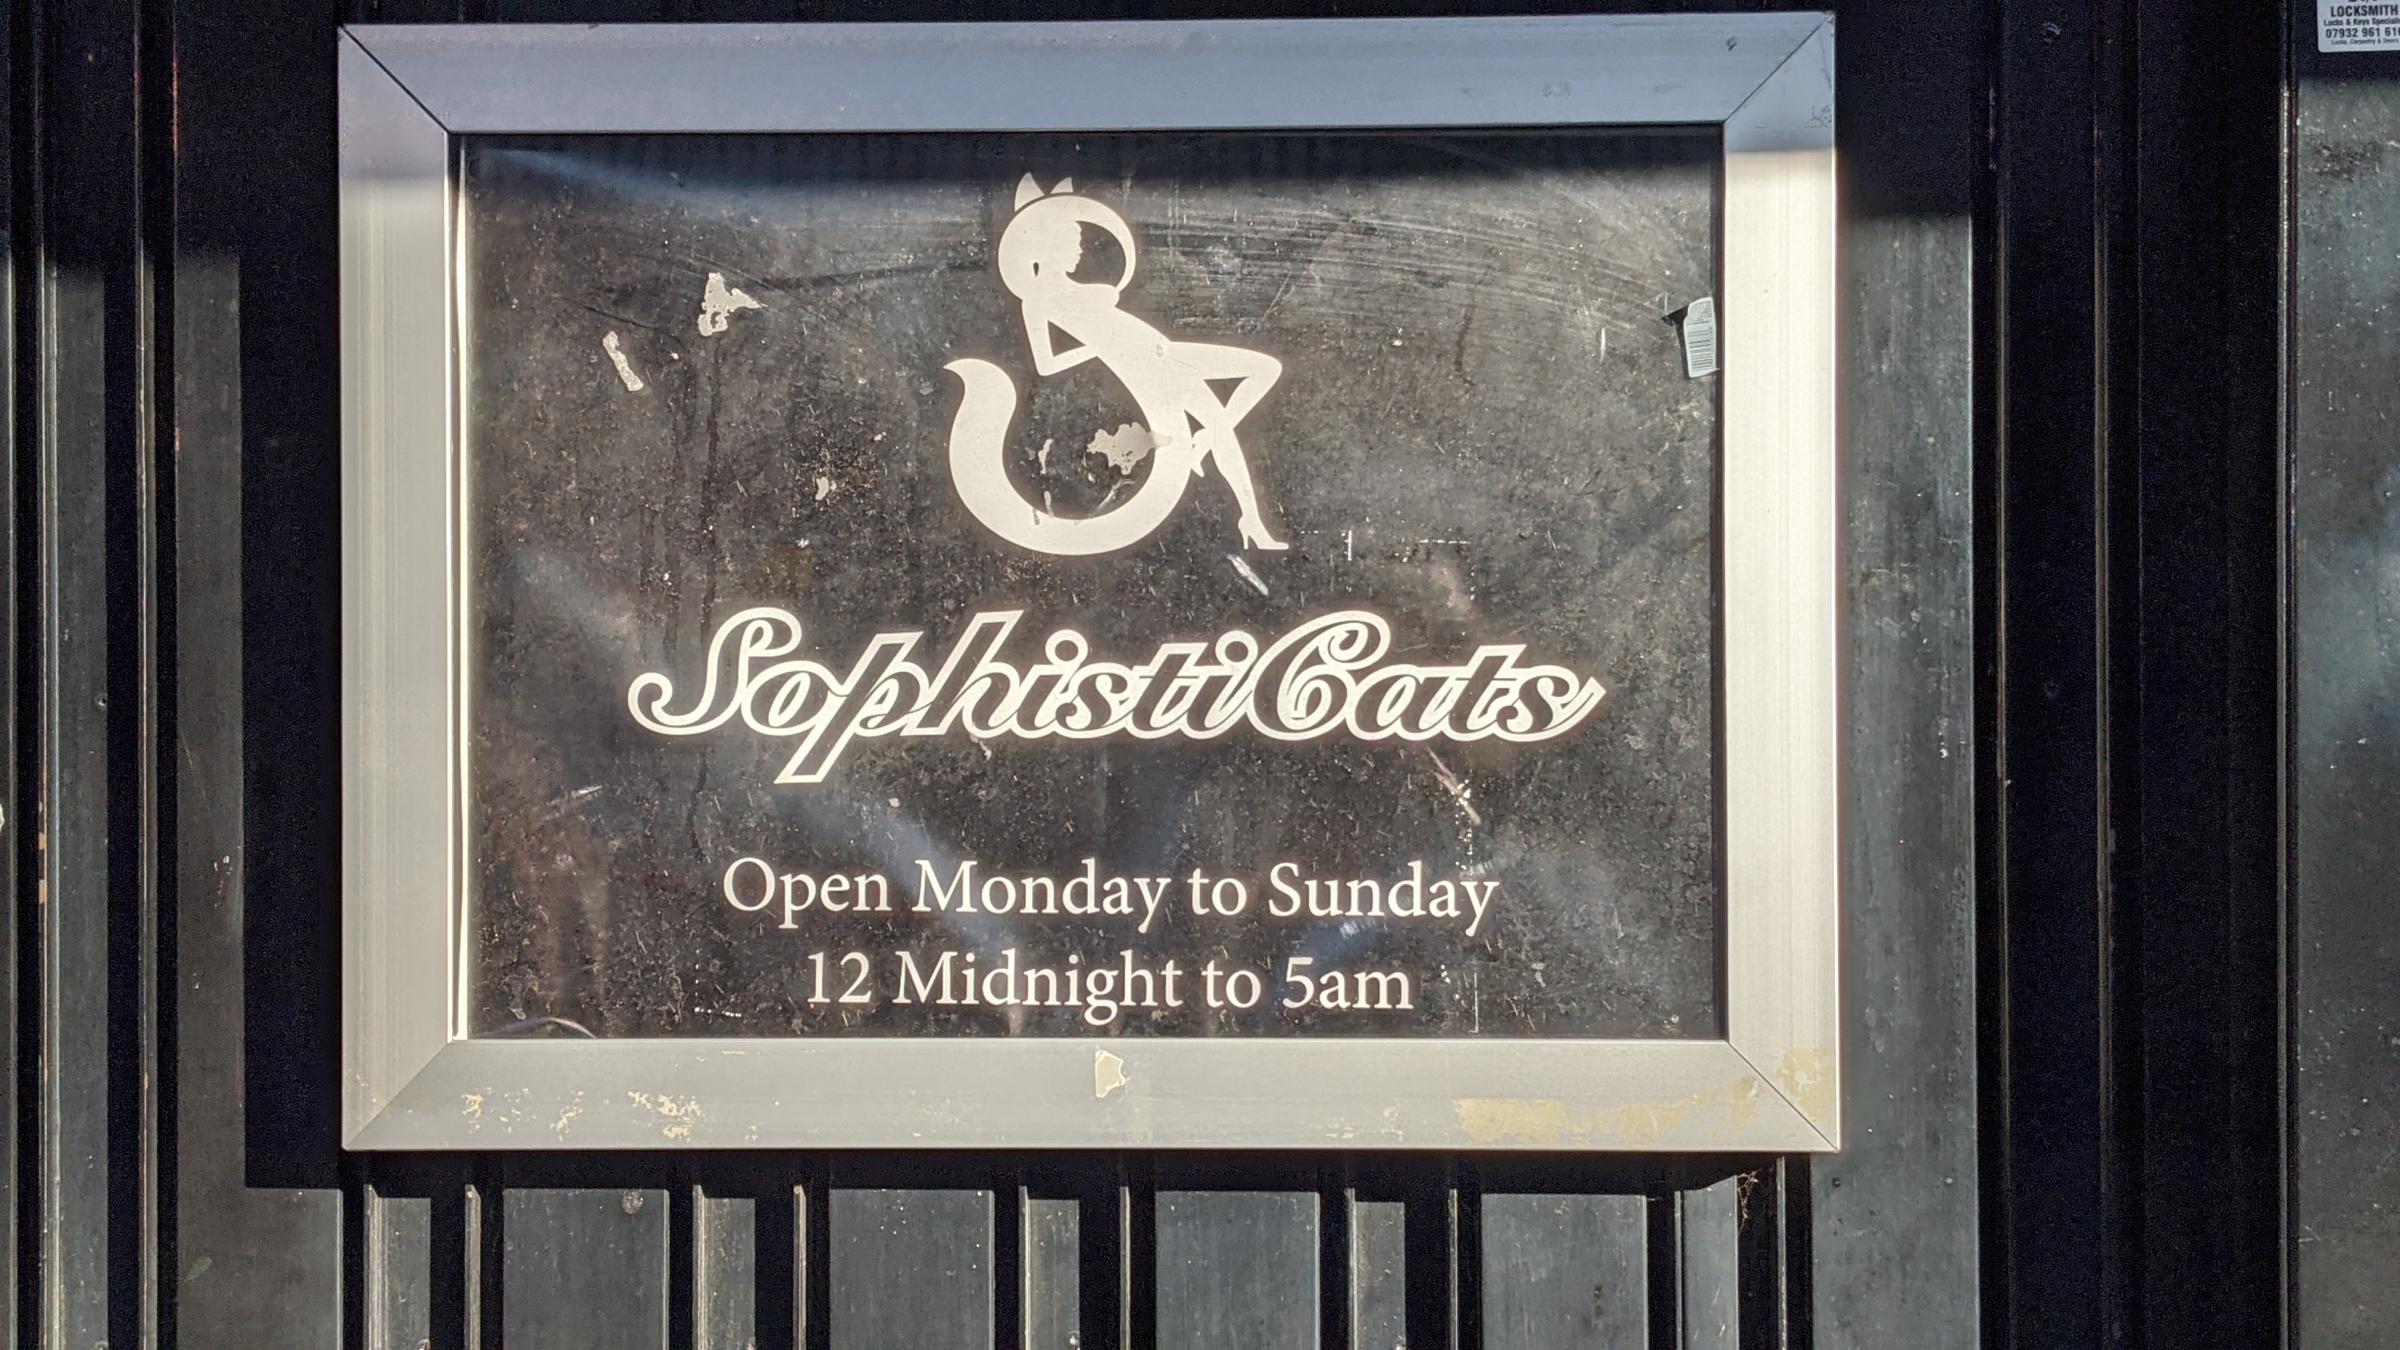 The sign for Sophisticats in Eversholt Street. Photo: Julia Gregory/LDRS